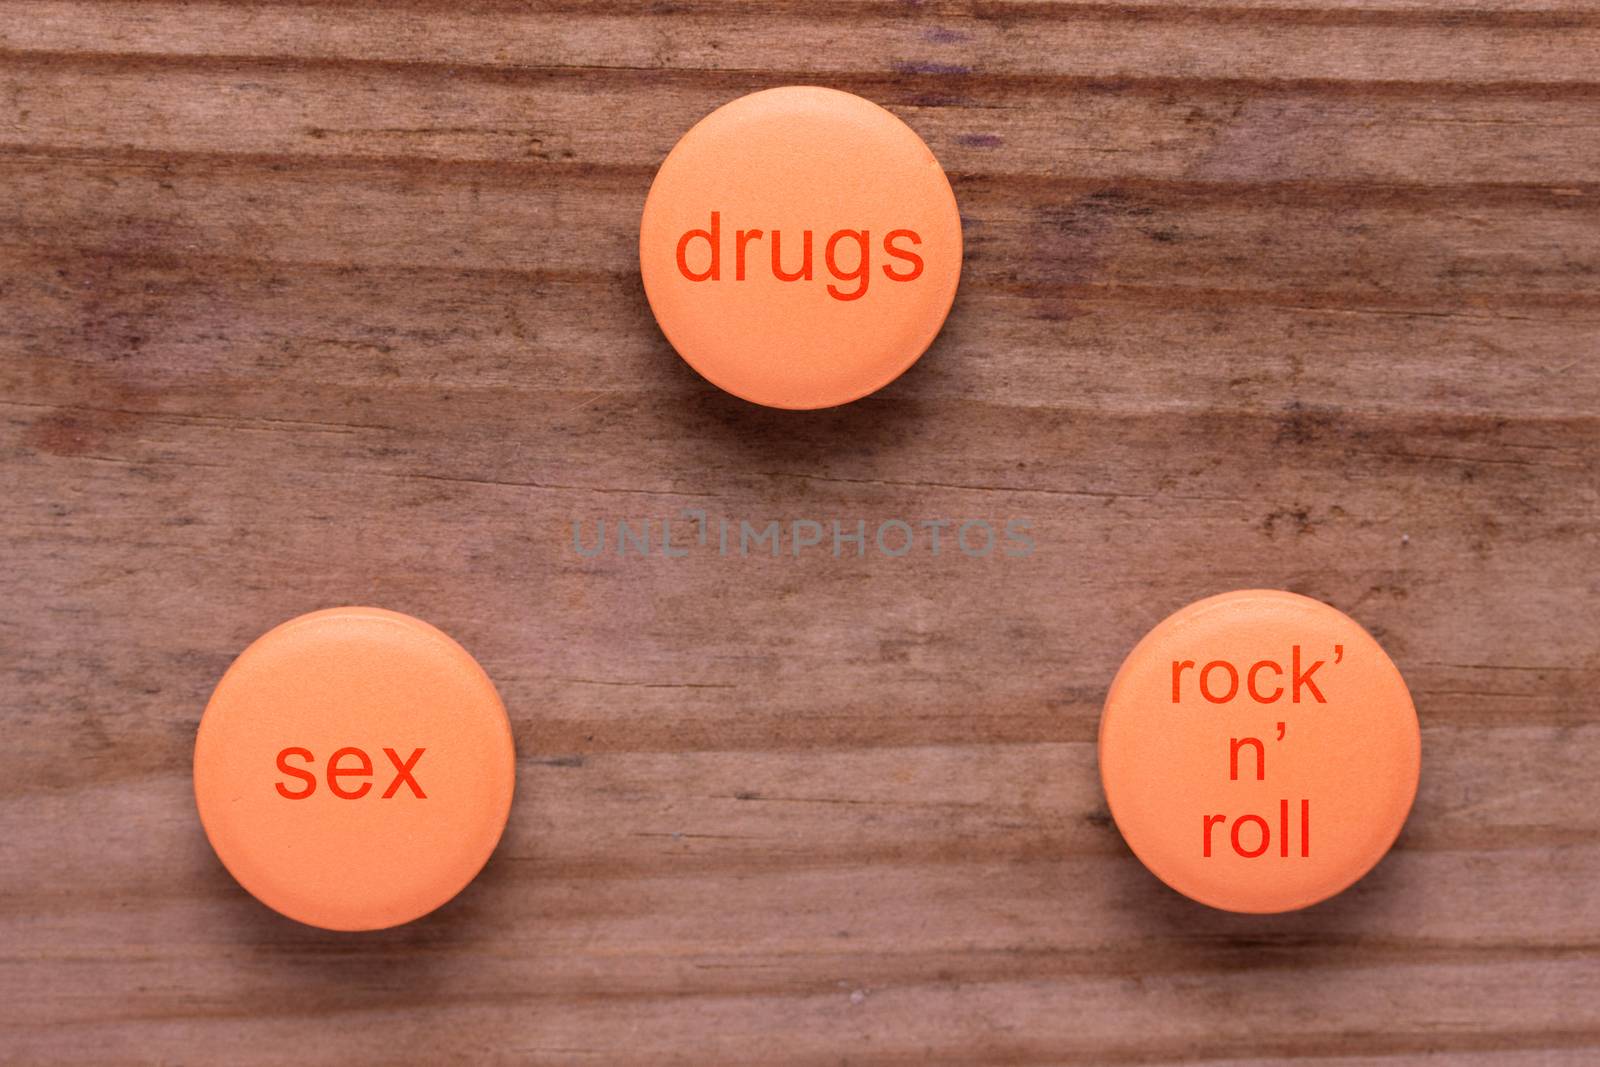 taking drugs lifestyle concept. pills with words drugs sex rock'n'roll